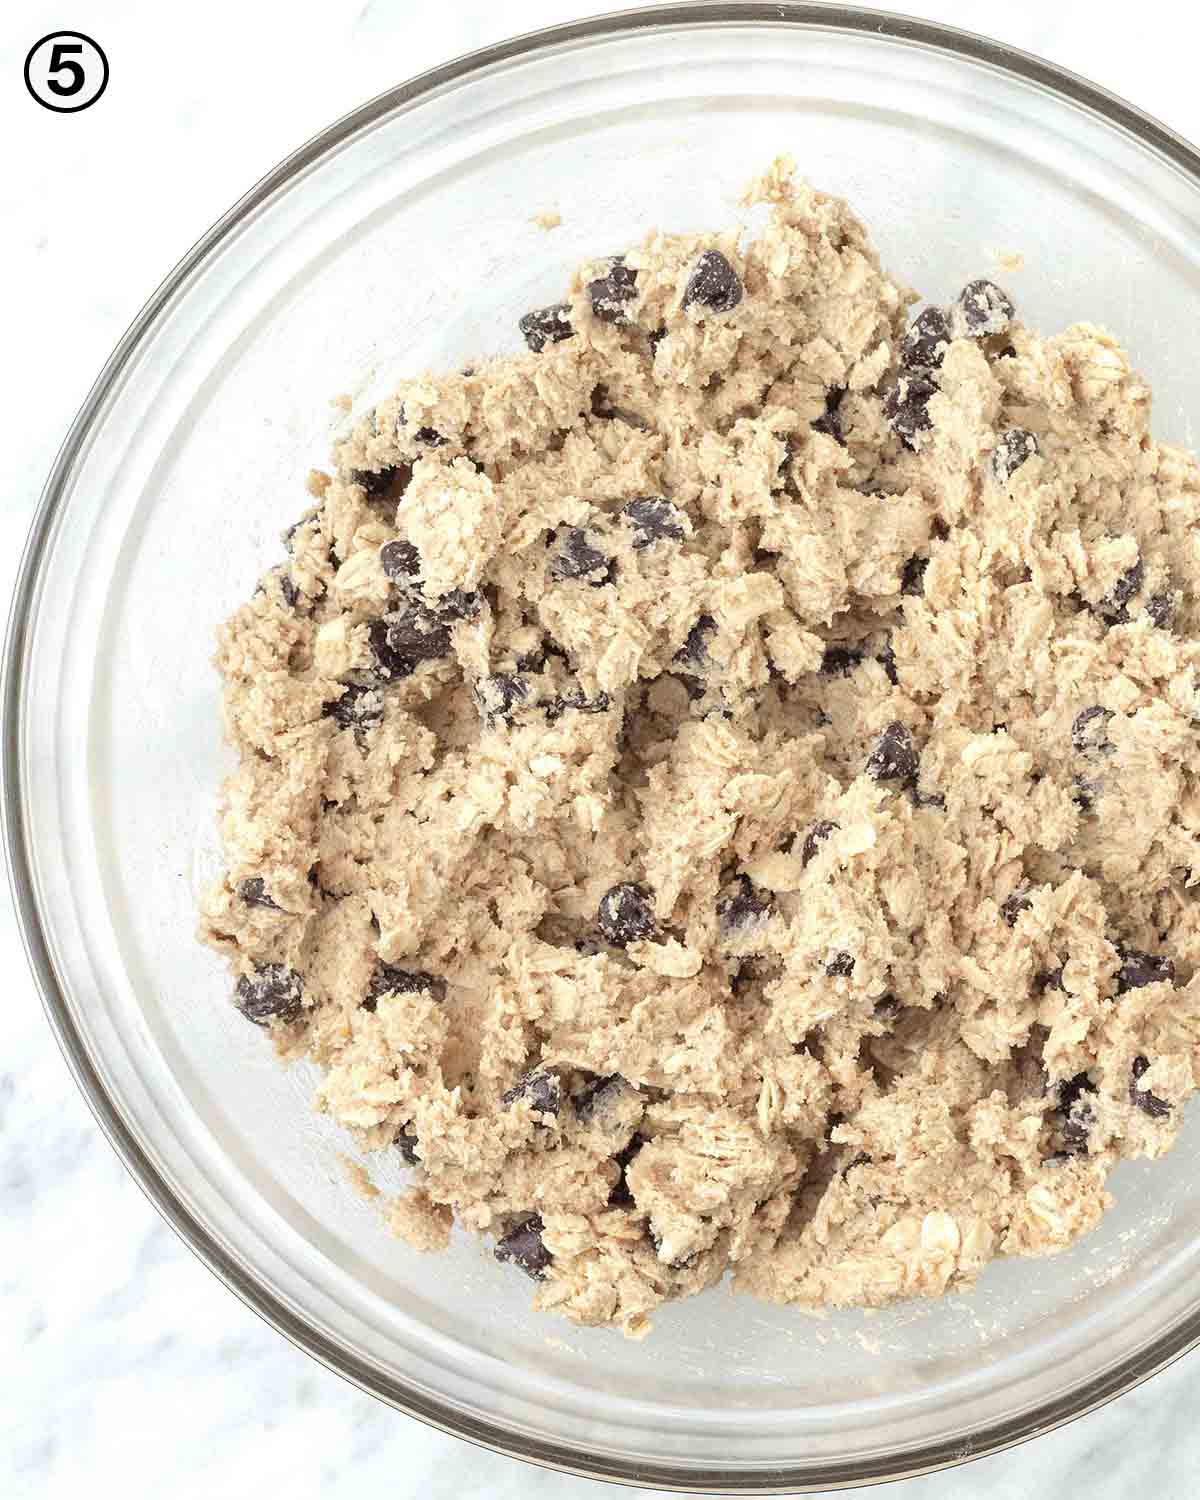 An overhead shot of cookie dough in a glass mixing bowl.